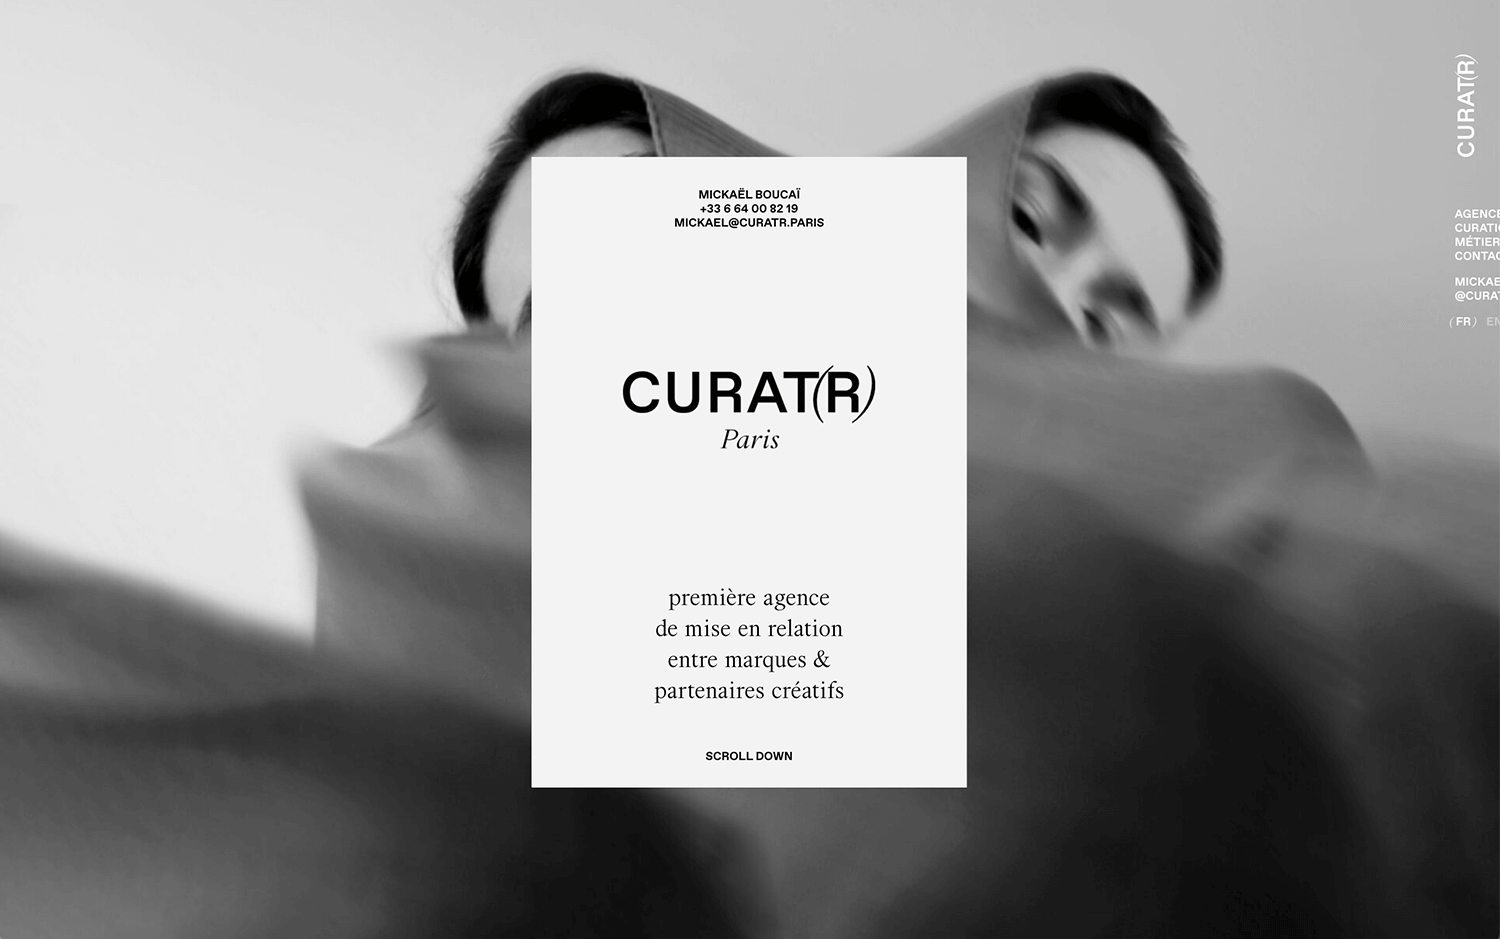 Curatr Paris one-page website example featuring a creative agency introduction